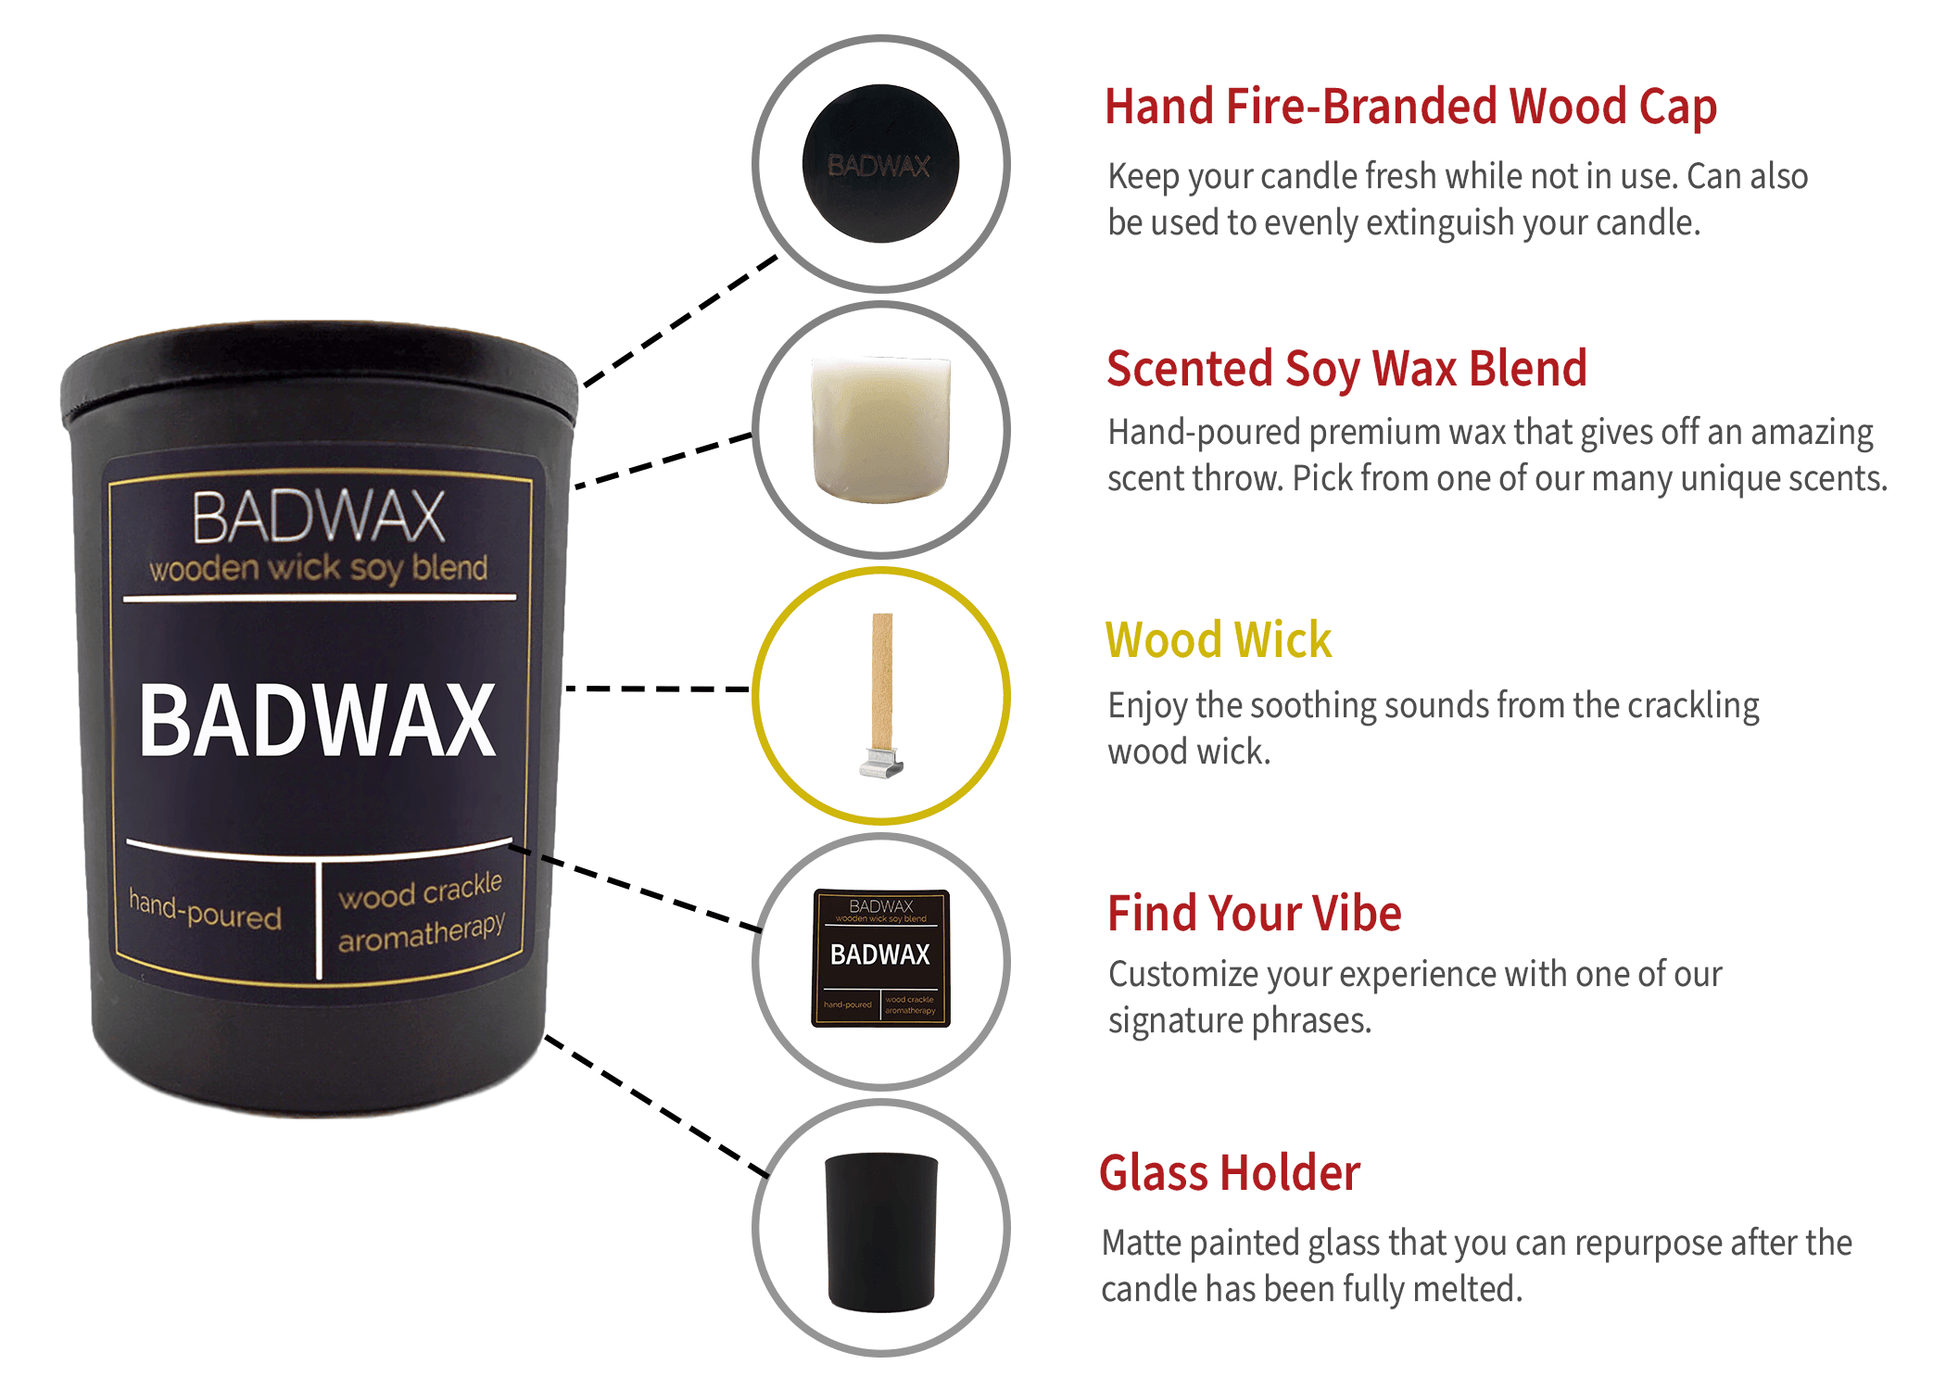 Best In Class Ass - Woodwick Candle - BADWAX